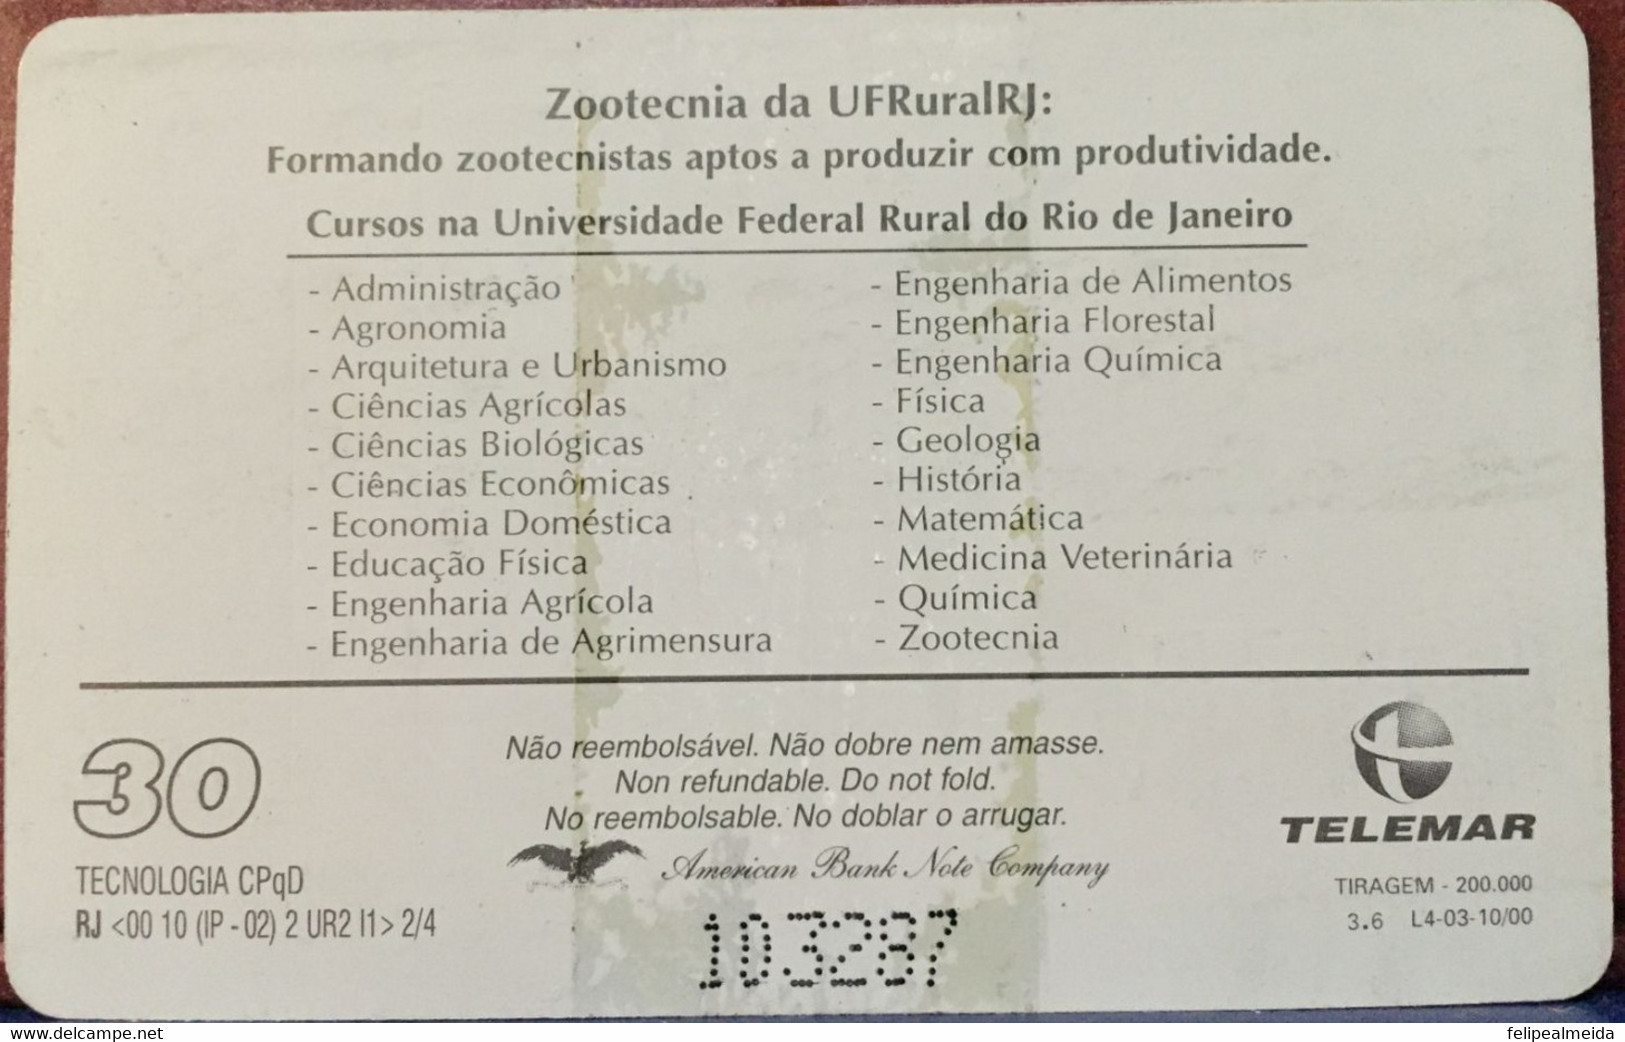 Phone Card Produced By Telemar In 2000 - Building Of The Animal Science Course At The Federal Rural University Of Rio De - Cultural